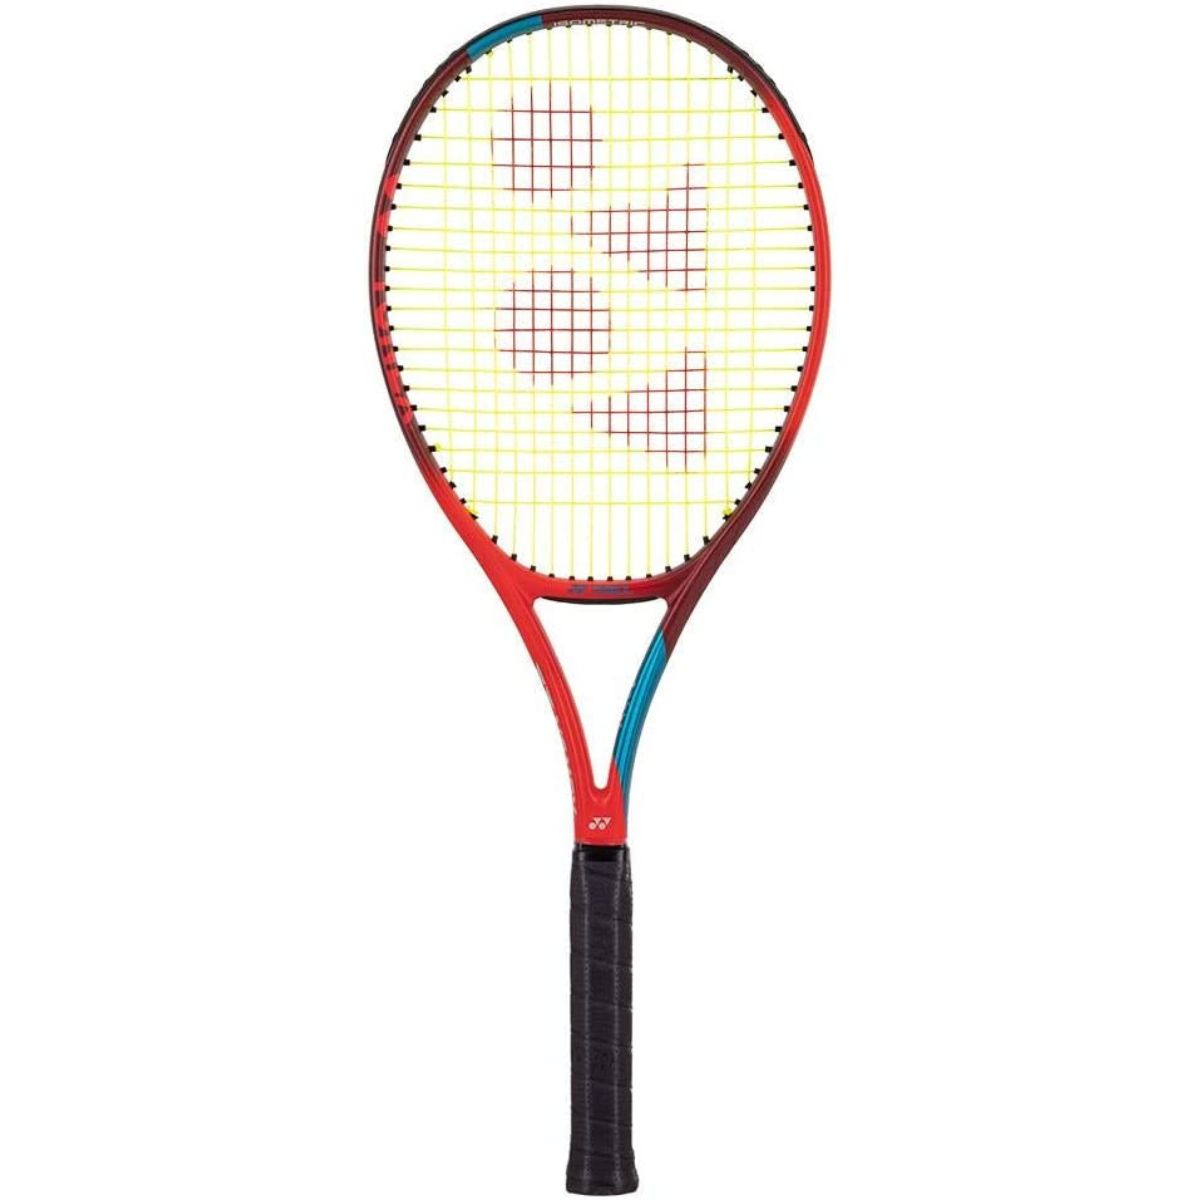 The Best Tennis Rackets for Flat Hitters Options: Yonex VCORE 95